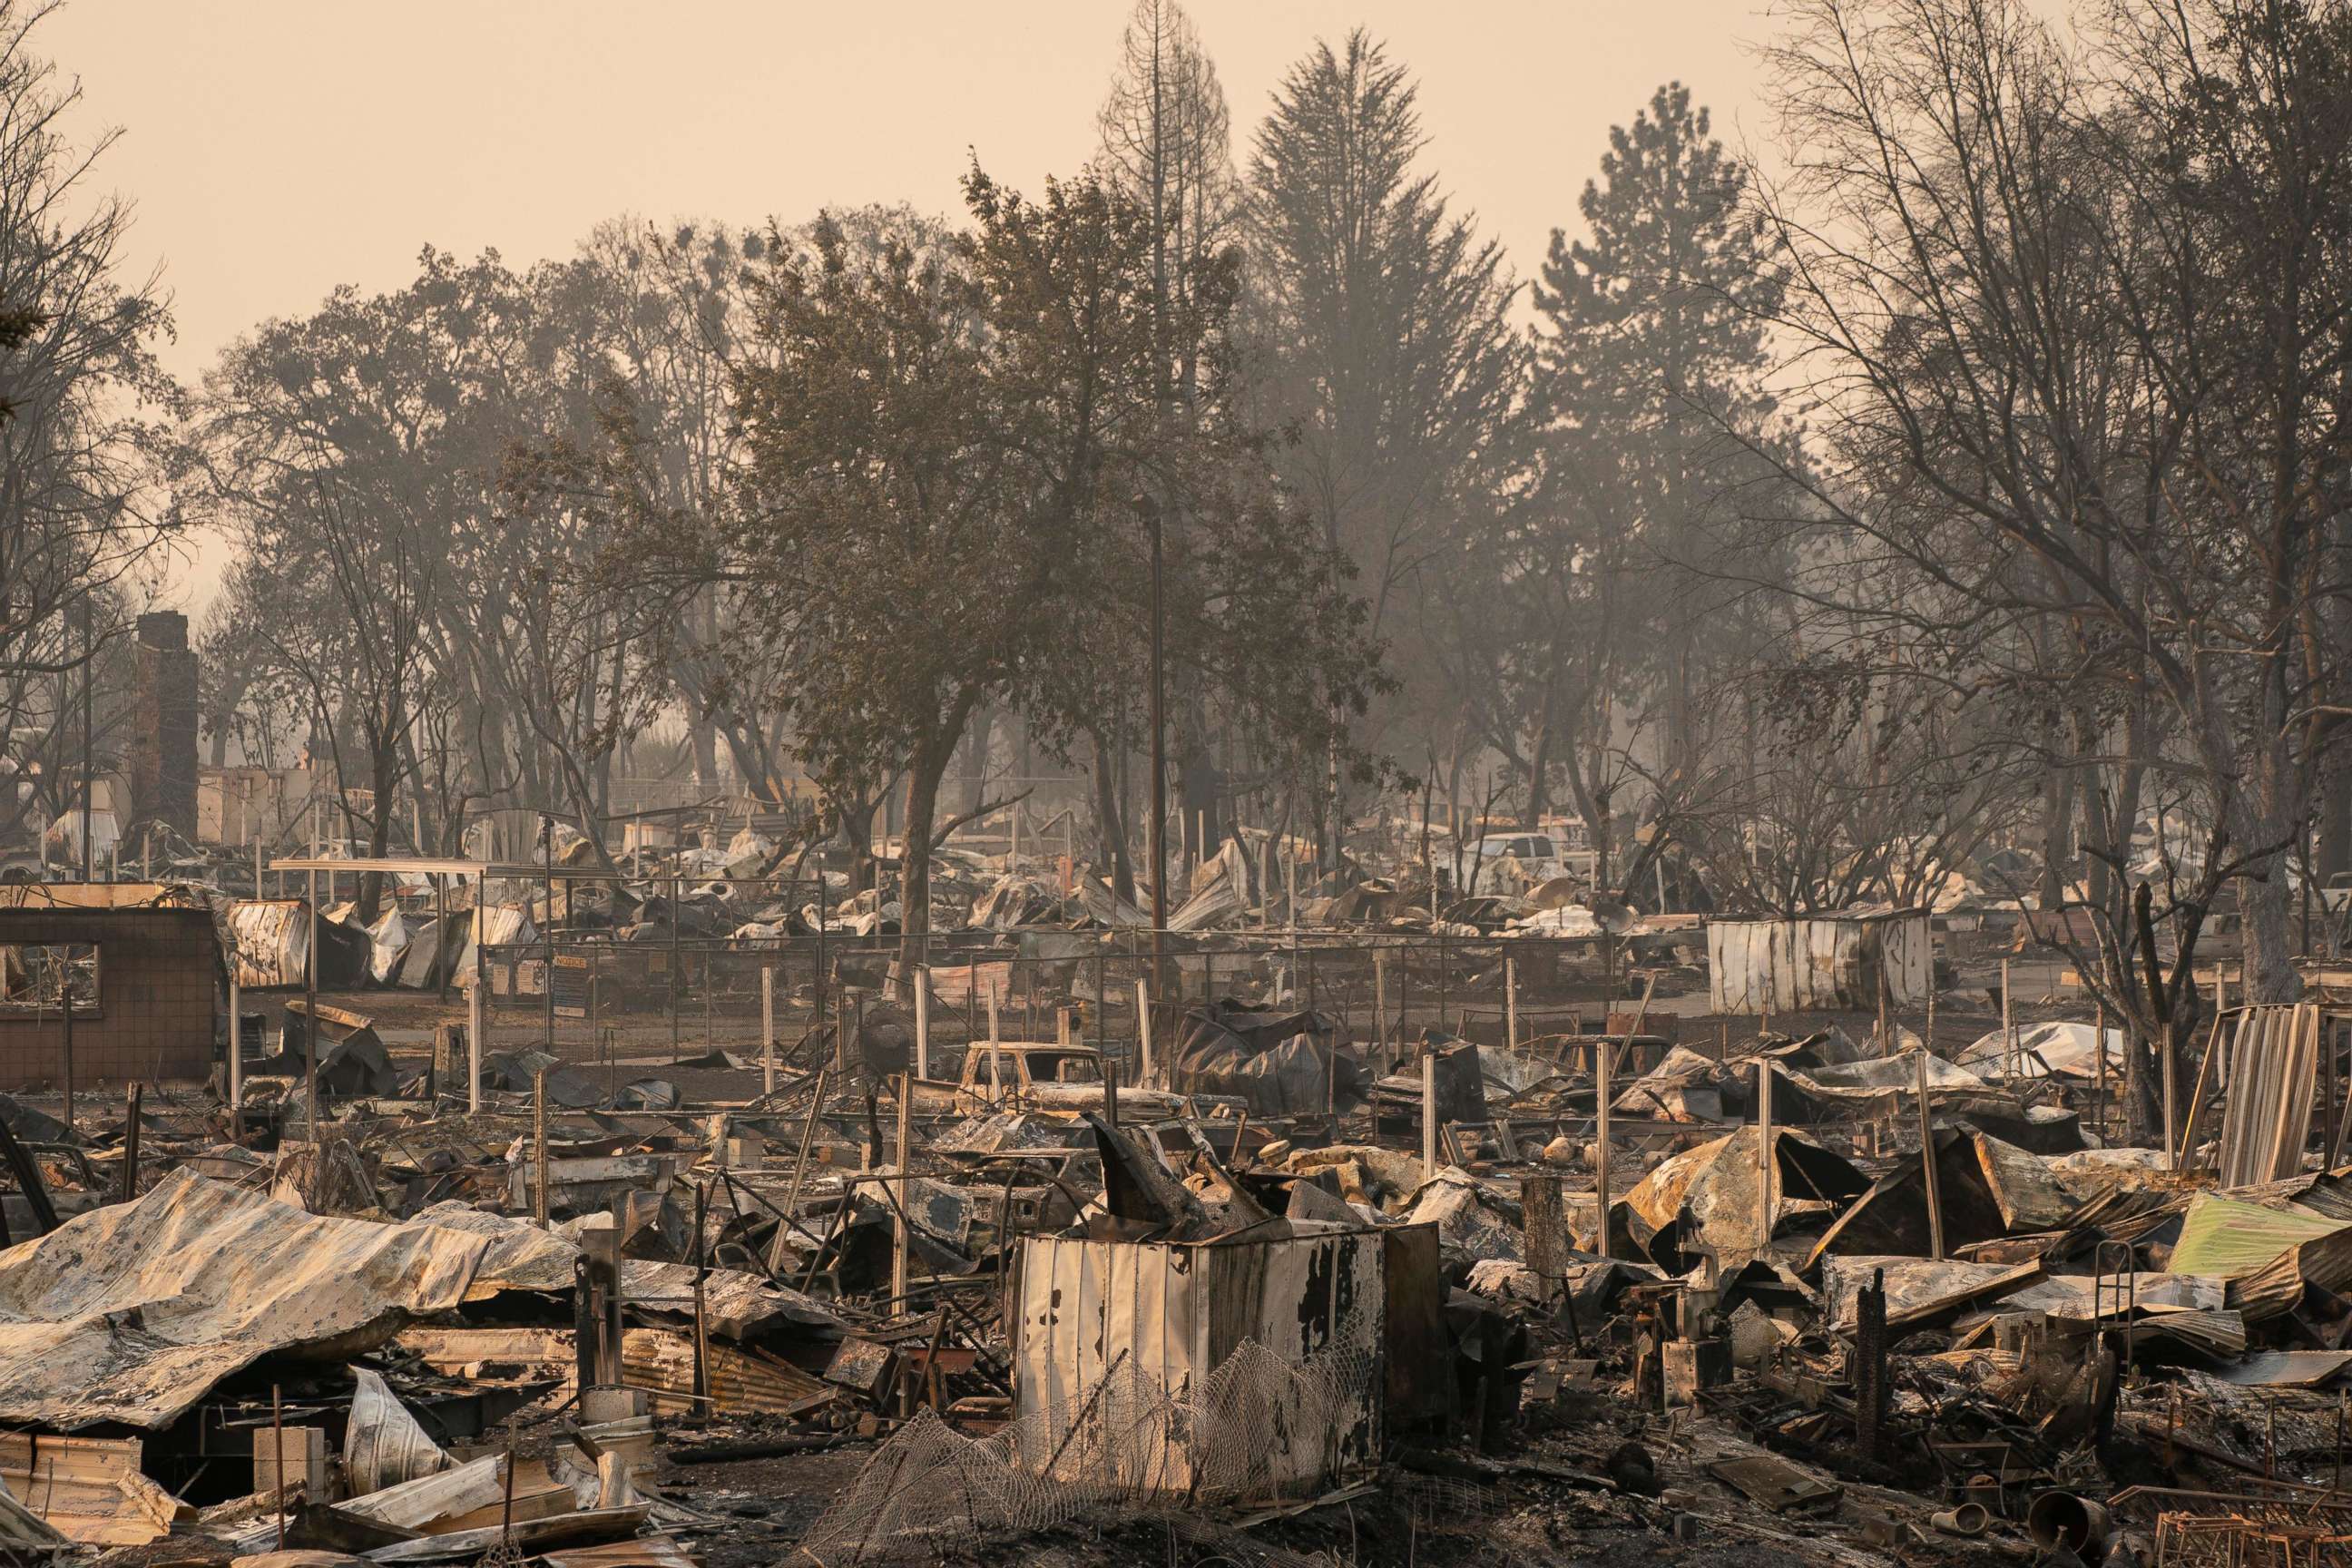 PHOTO: Damaged homes and cars are seen in a mobile home park destroyed by fire, Sept. 10, 2020, in Phoenix, Ore. 